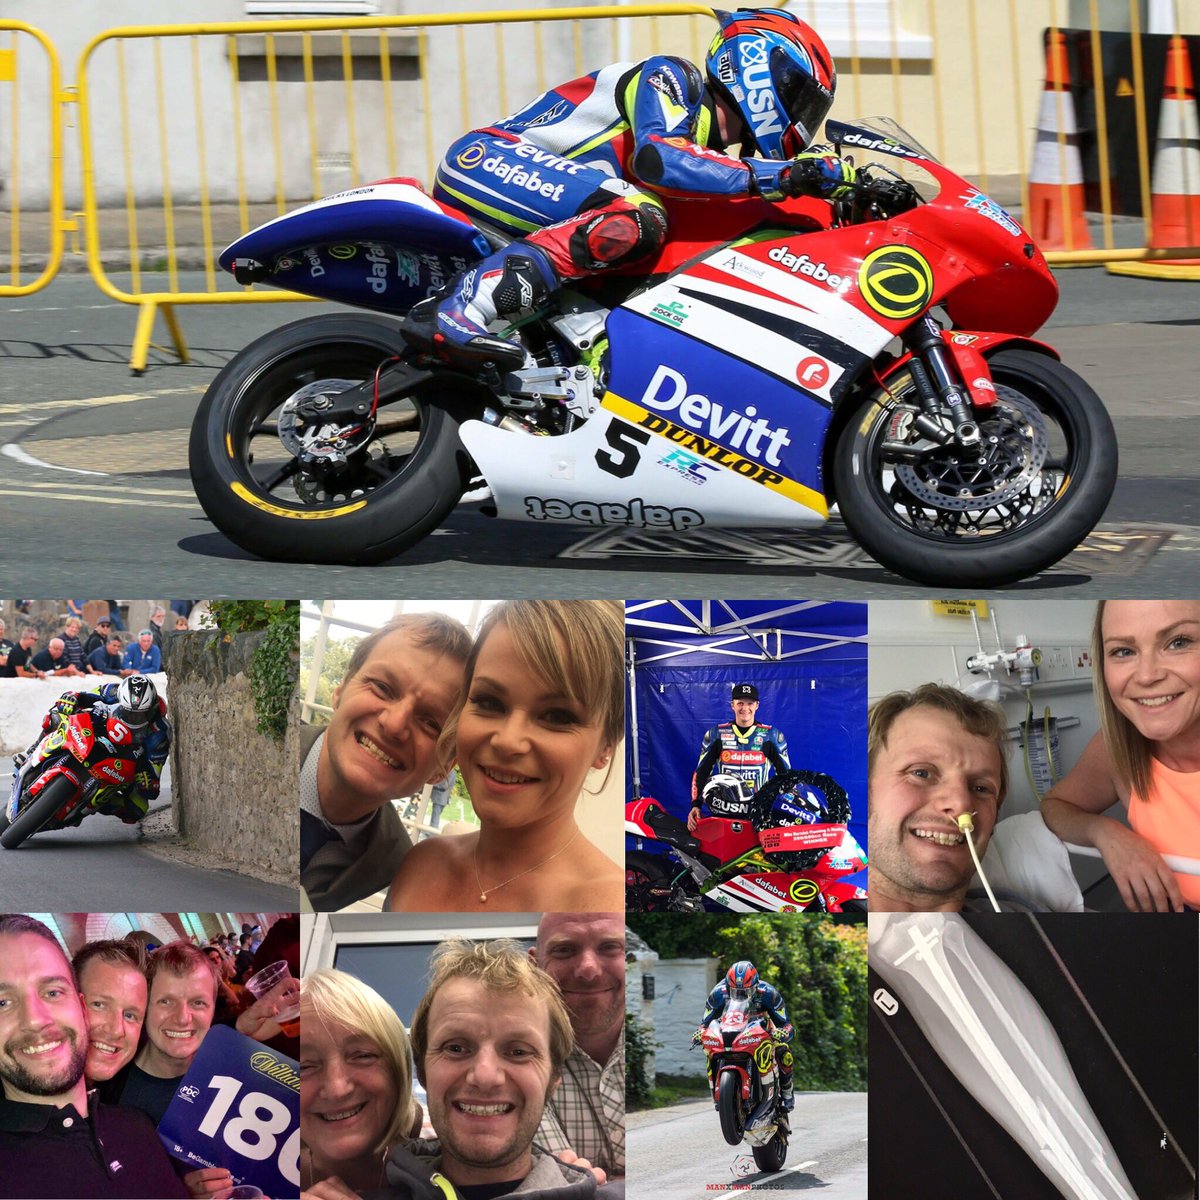 Obviously been a year full of up and down bits. The ups been fantastic with some of them photos. The down side has been rough and again ain’t fully recovered yet but getting there. This side of my 2018 was always made better because of friends and family round me, happy new year!